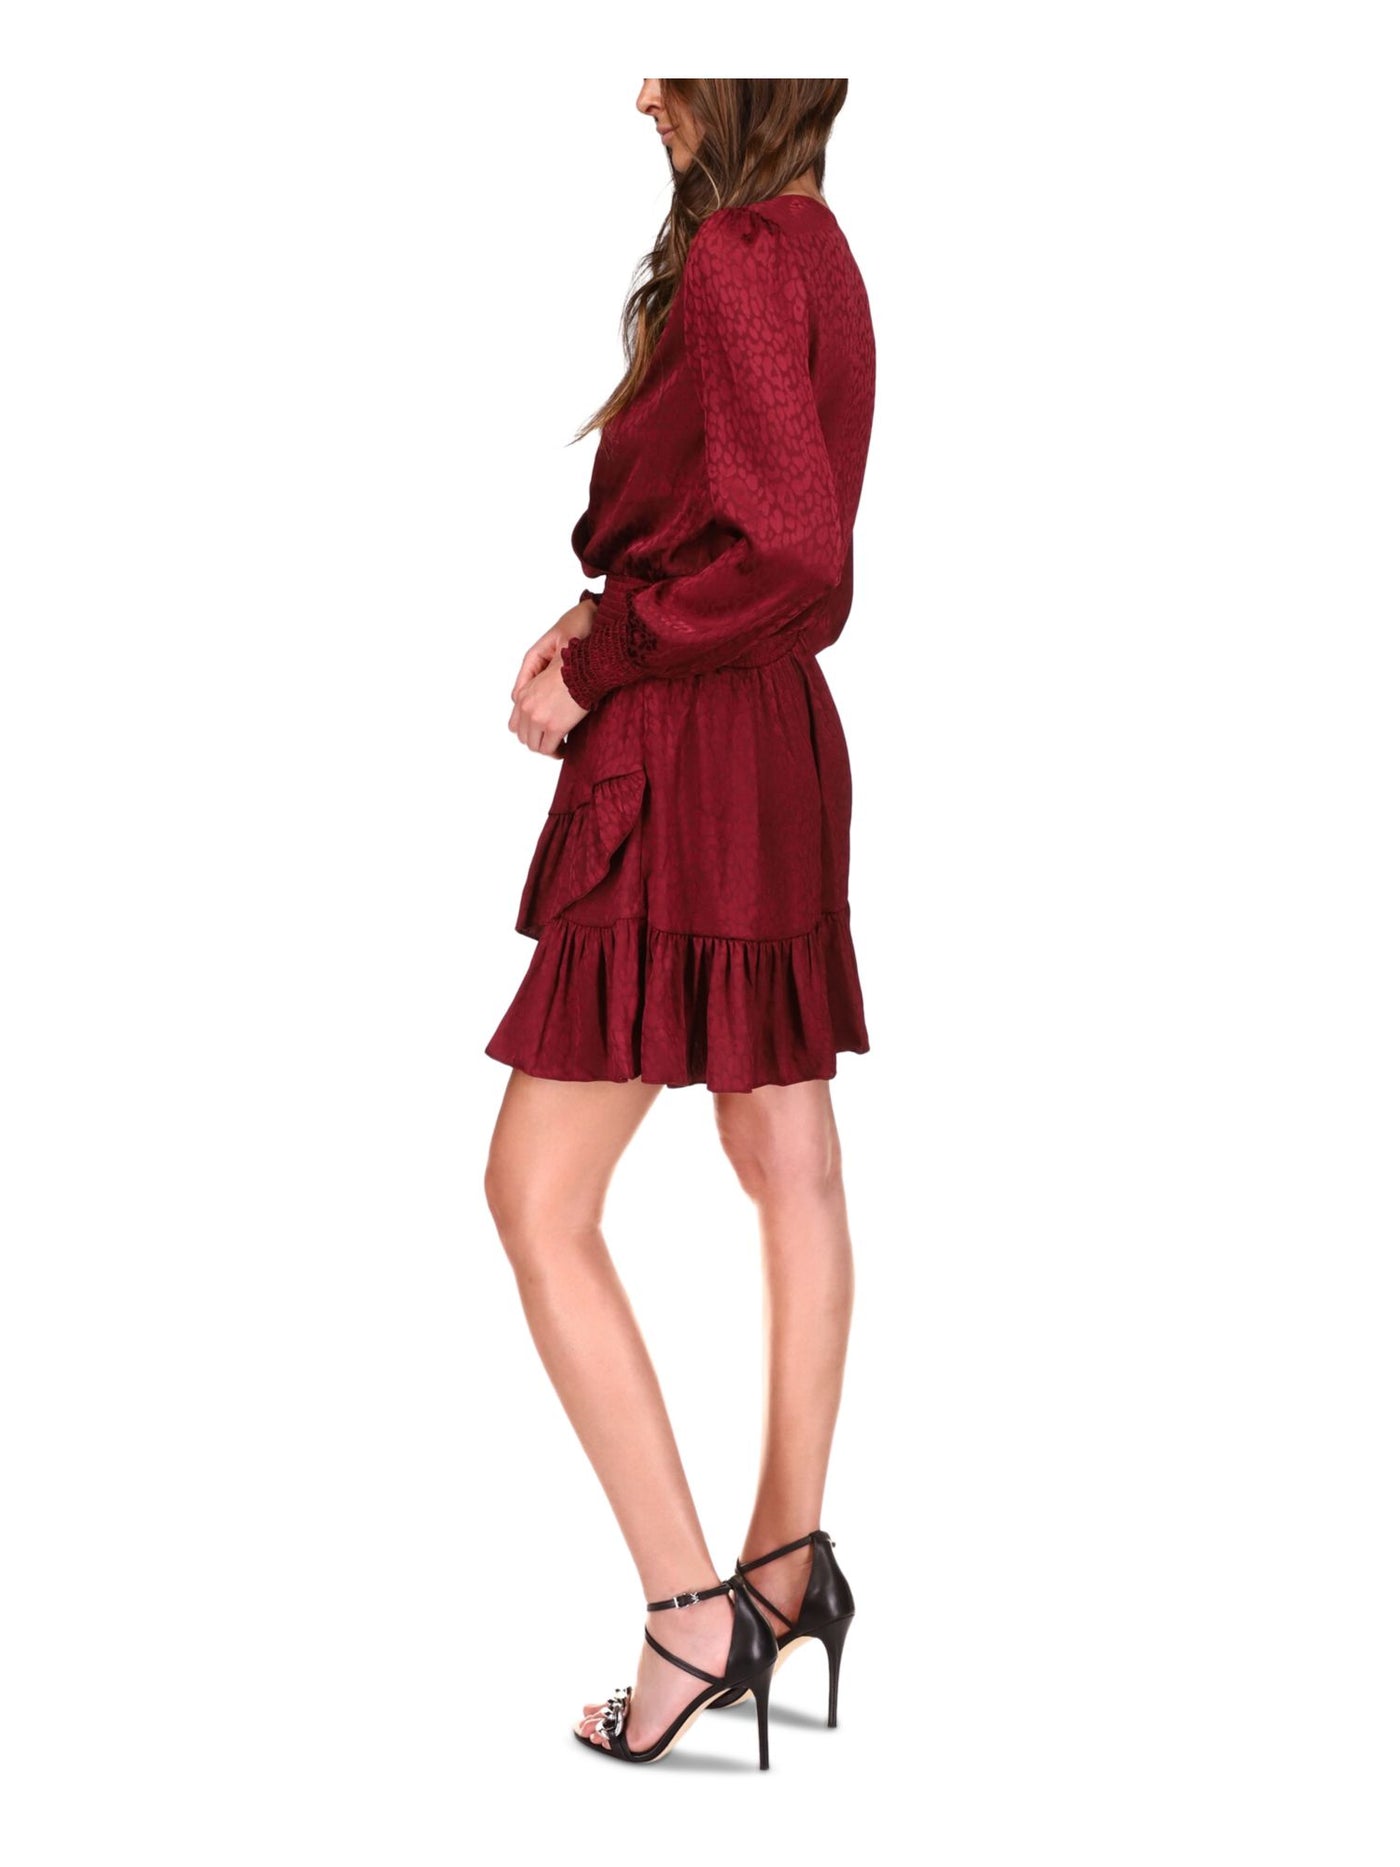 MICHAEL MICHAEL KORS Womens Maroon Smocked Ruffled Cuffed Pull-on Style Long Sleeve V Neck Above The Knee Cocktail Faux Wrap Dress XS